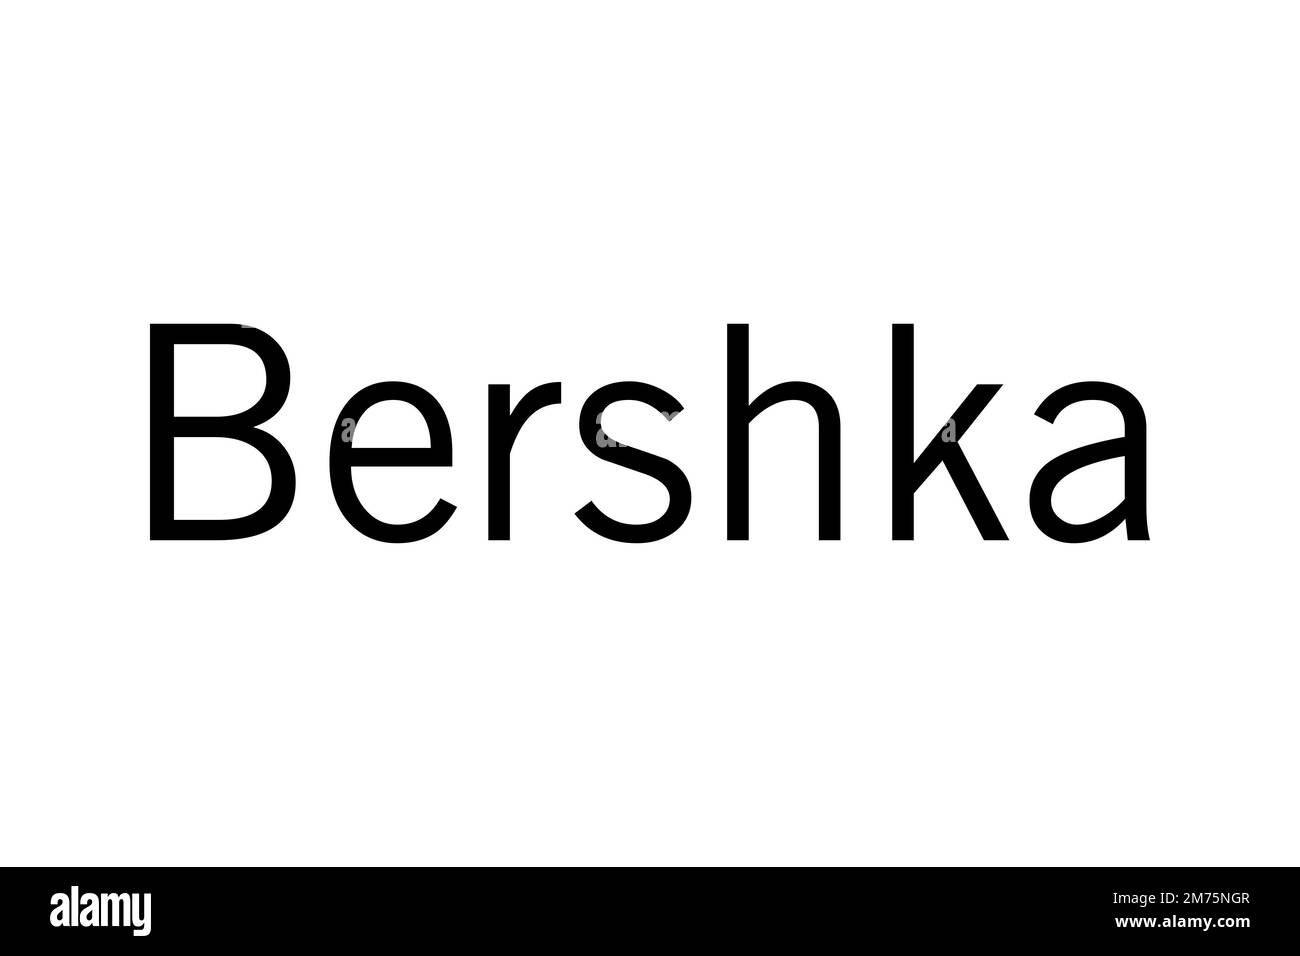 Bershka logo brand name Cut Out Stock Images & Pictures - Alamy